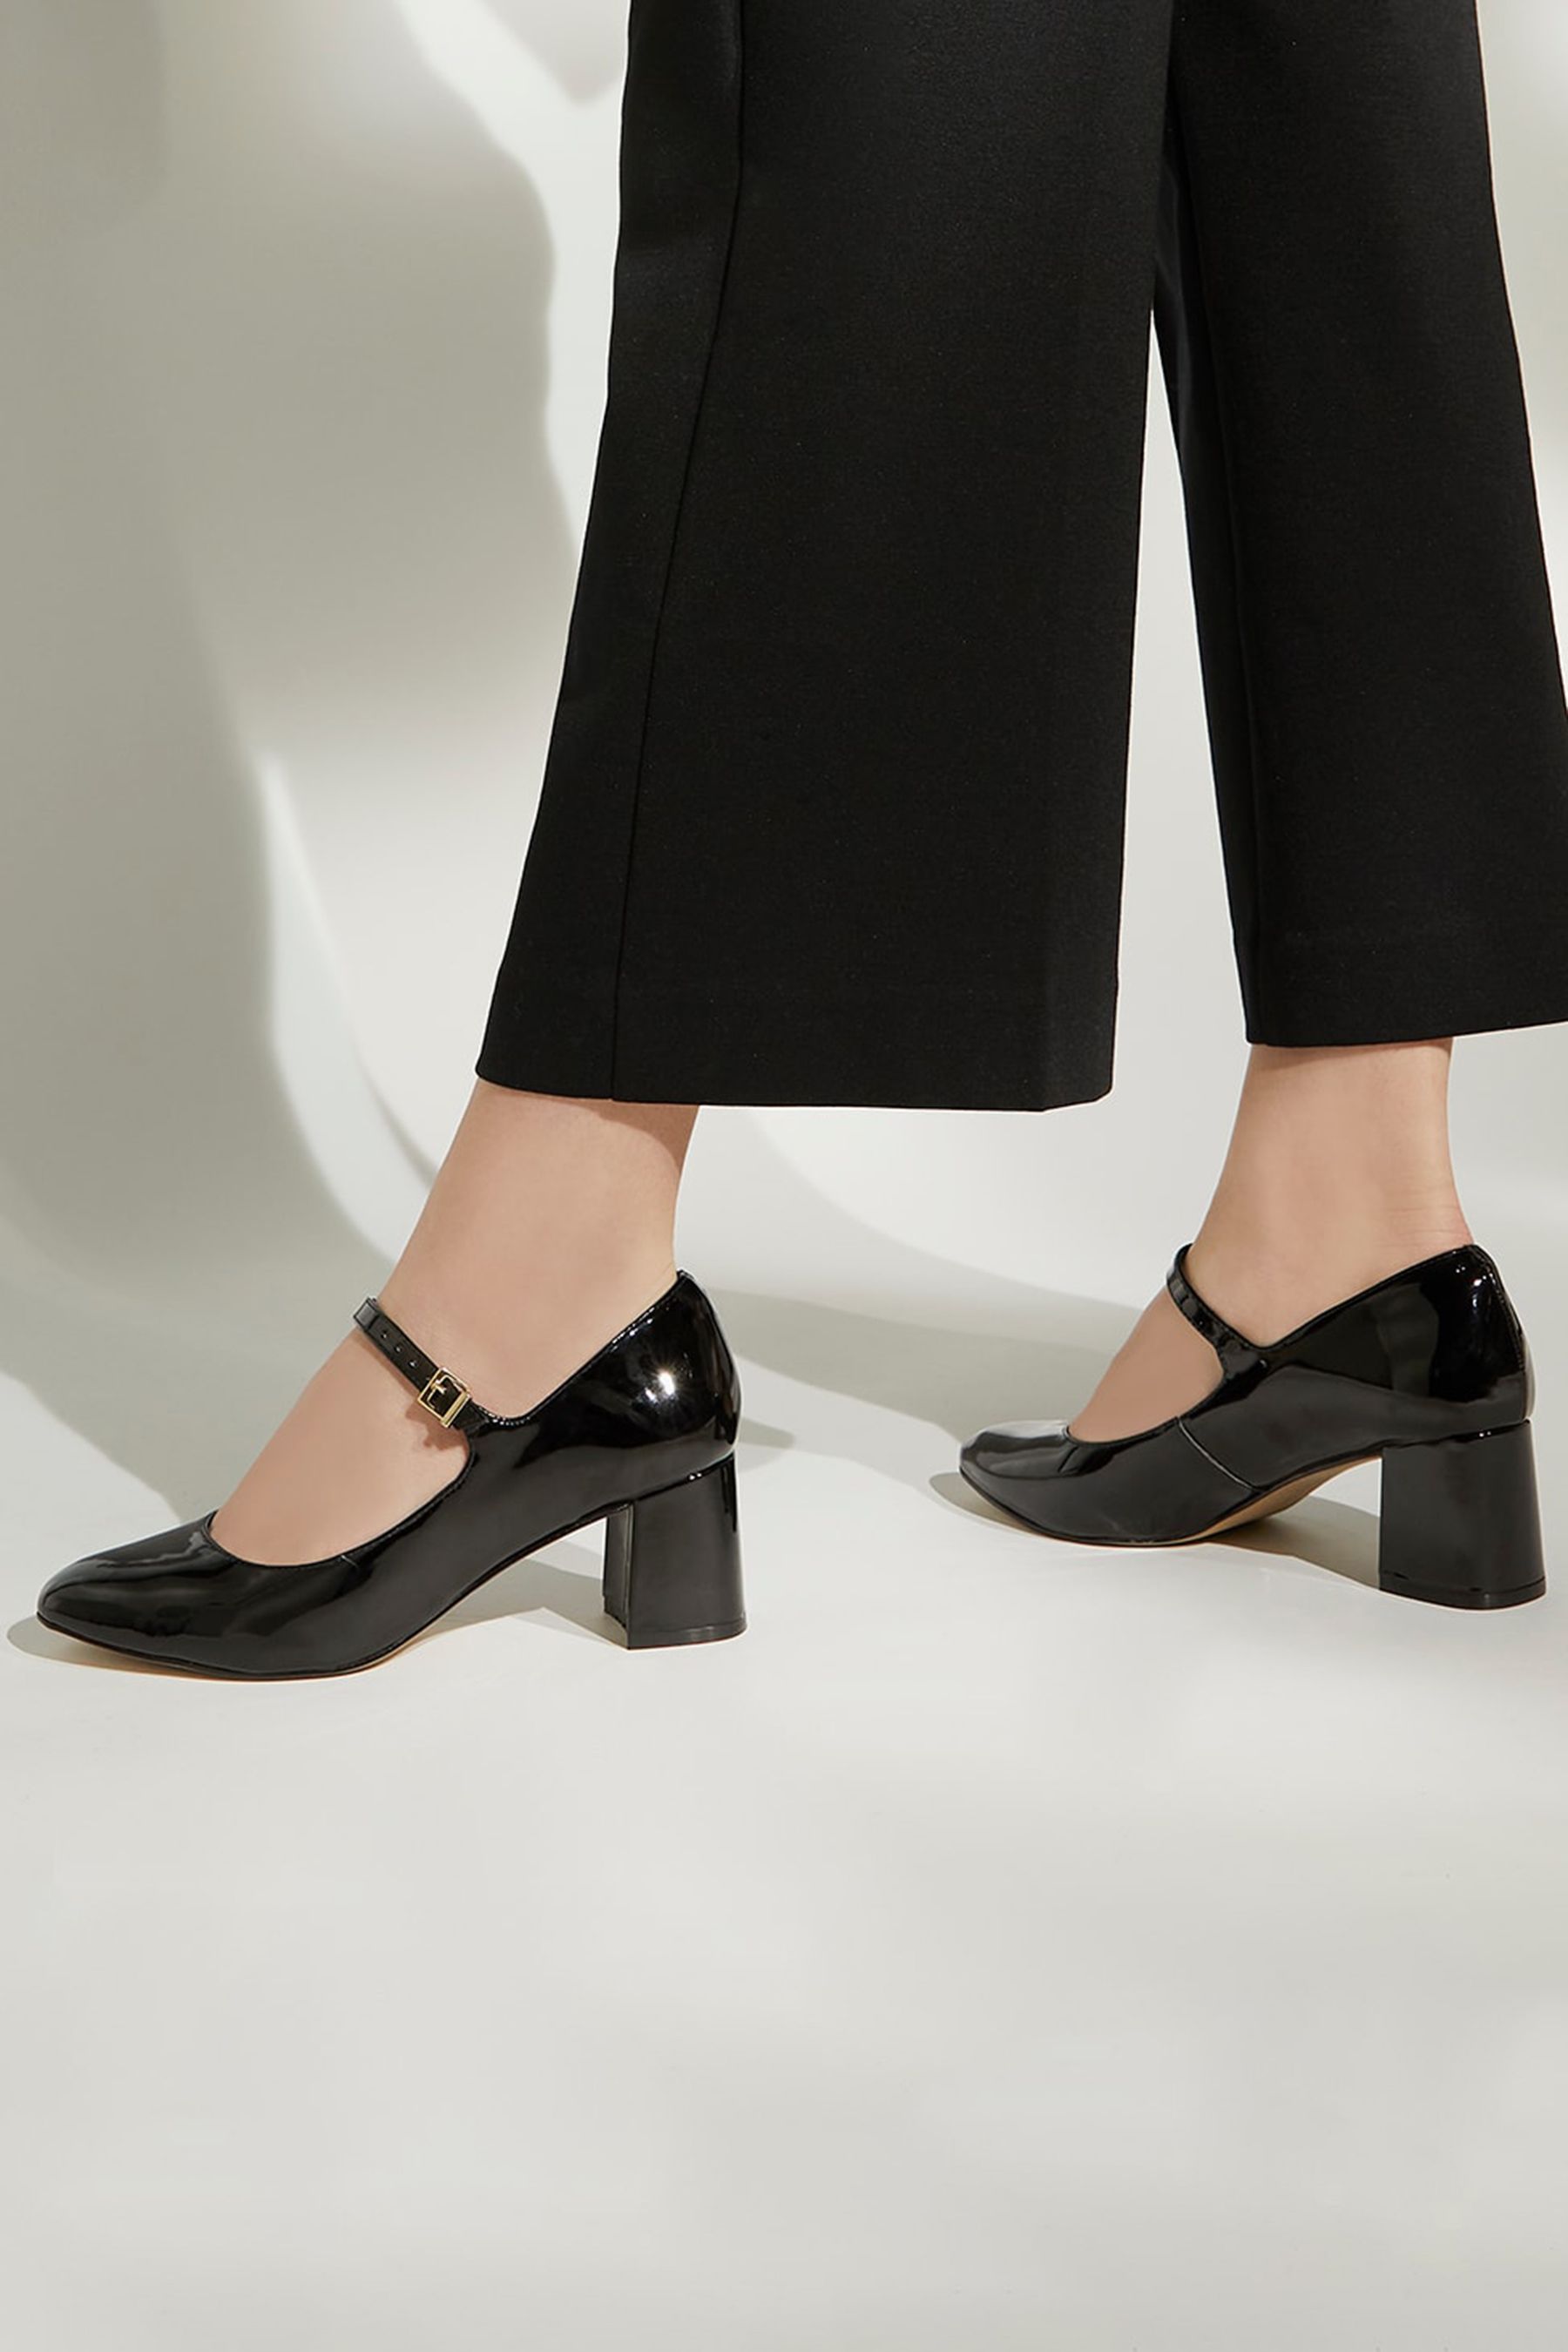 Buy Dune London Black Patent Alenna Mary Jane Court Shoes from the Next ...